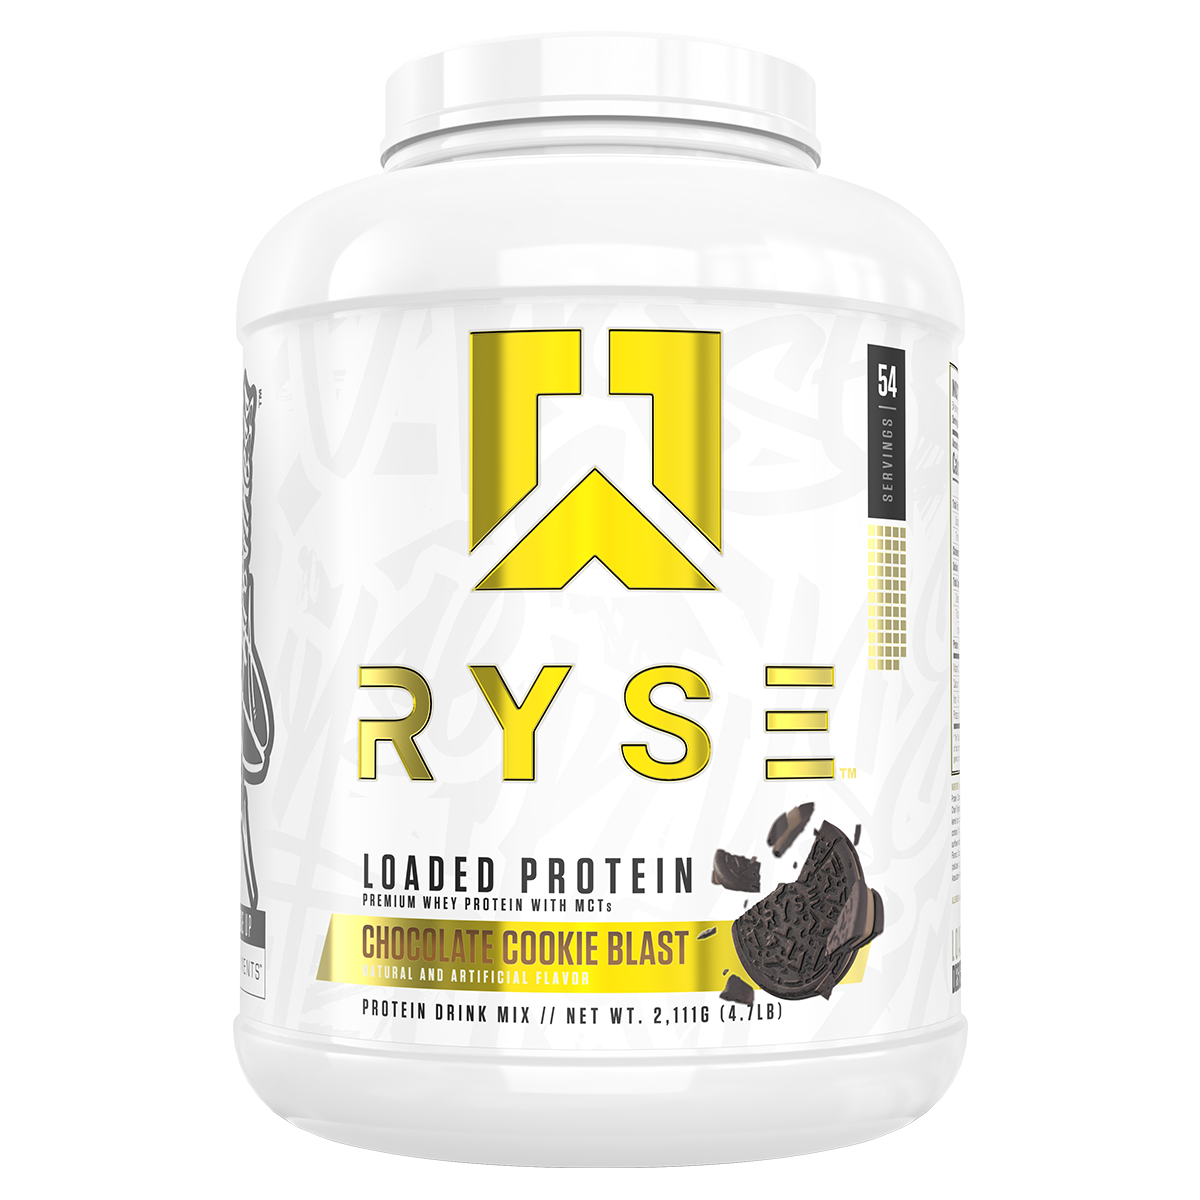 Ryse Loaded Protein - Super Nutrition